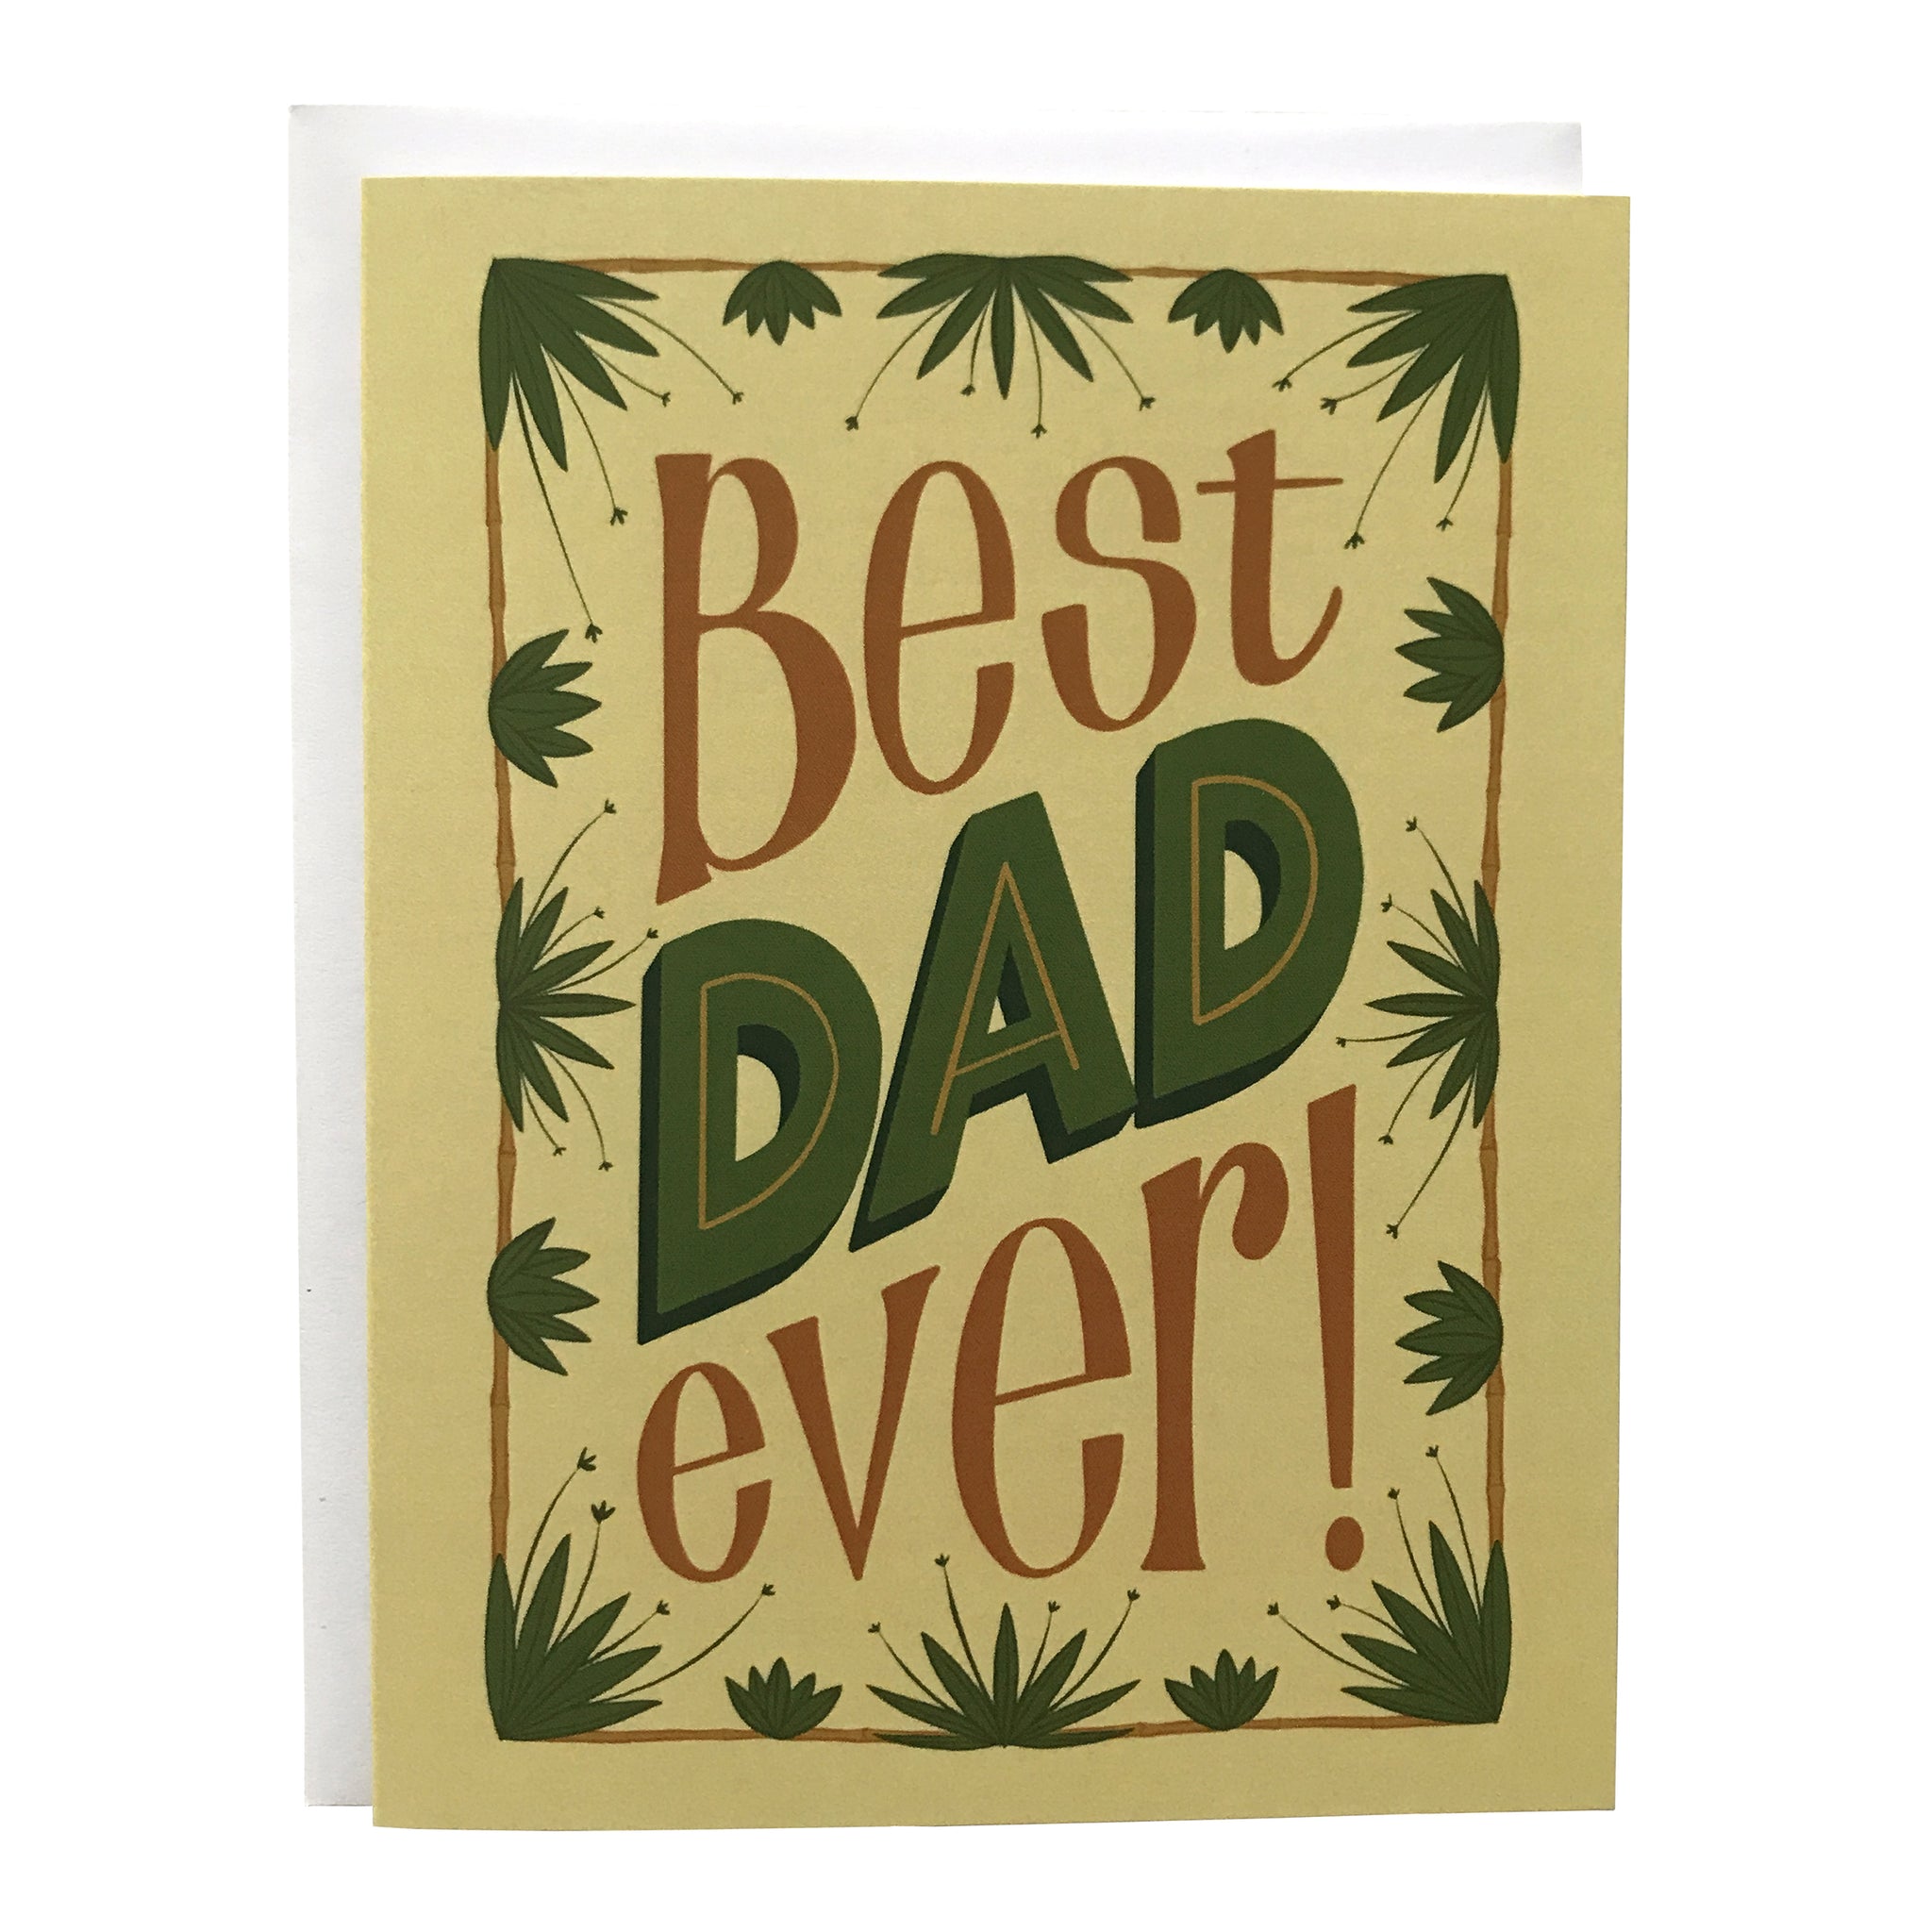 A pale yellow card reads "Best DAD ever!" in brown and green hand lettering. The letters are framed in a brown rectangle out of which sprout green tropical plants.The card sits against a white envelope on a white background.